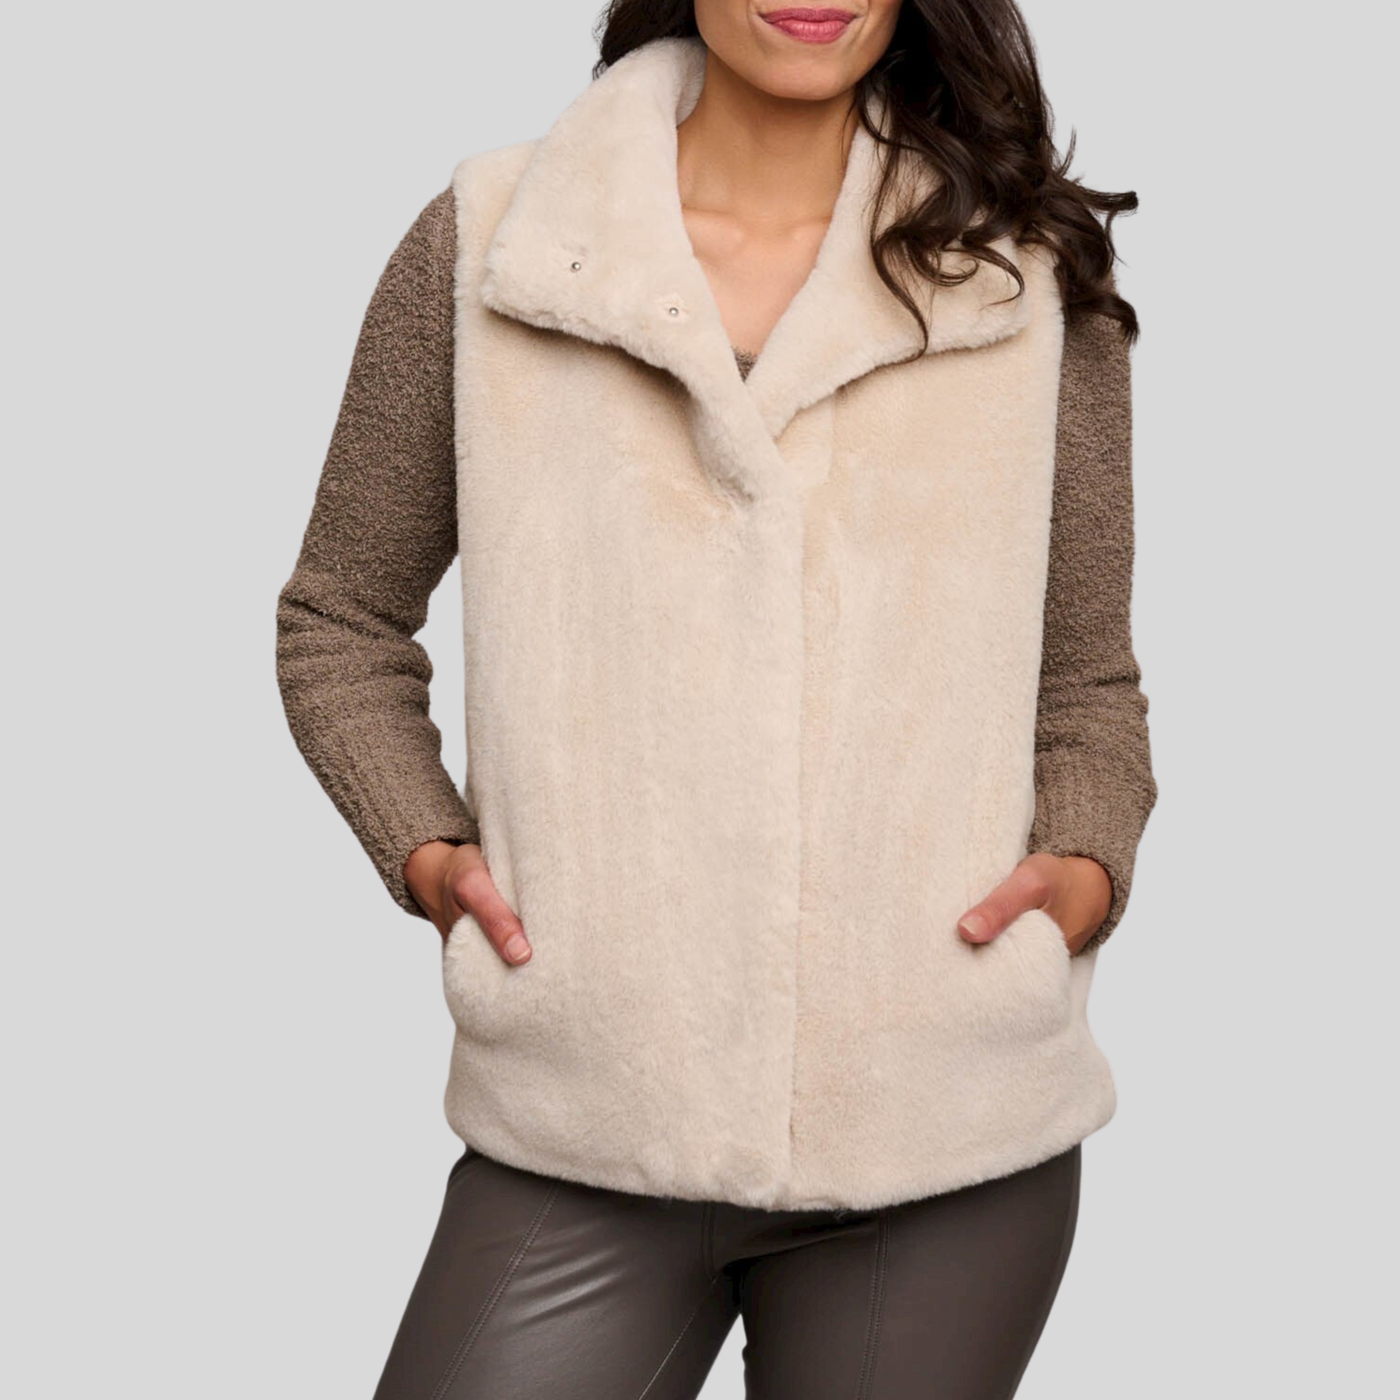 Gotstyle Fashion - Rino and Pelle Jackets Faux Fur High Collar Short Waistcoat - Stone